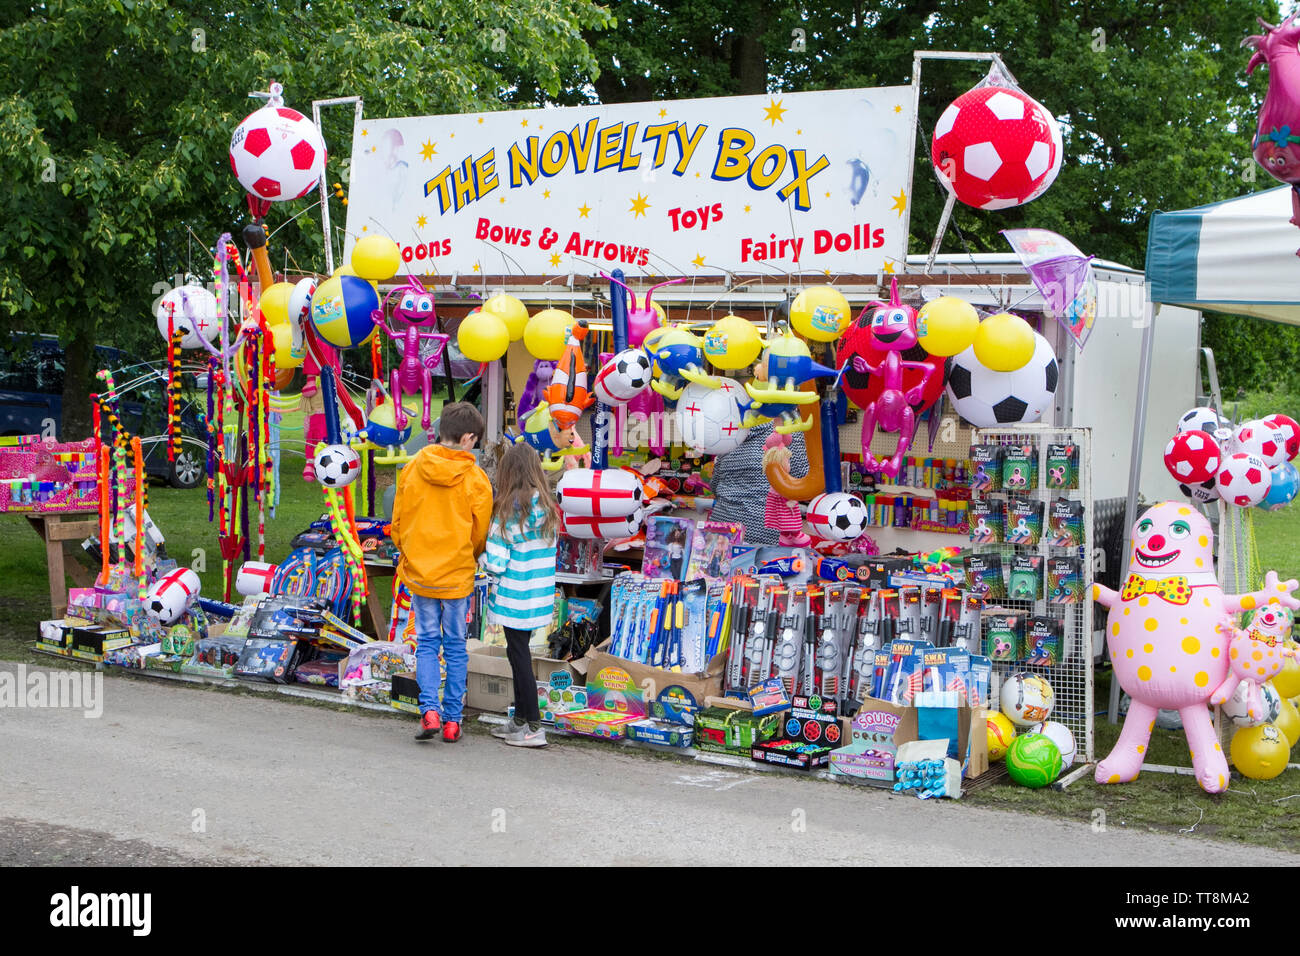 A novelty toy stall store at the Leyland Park Festival in Leyland, Lancashire, UK Stock Photo